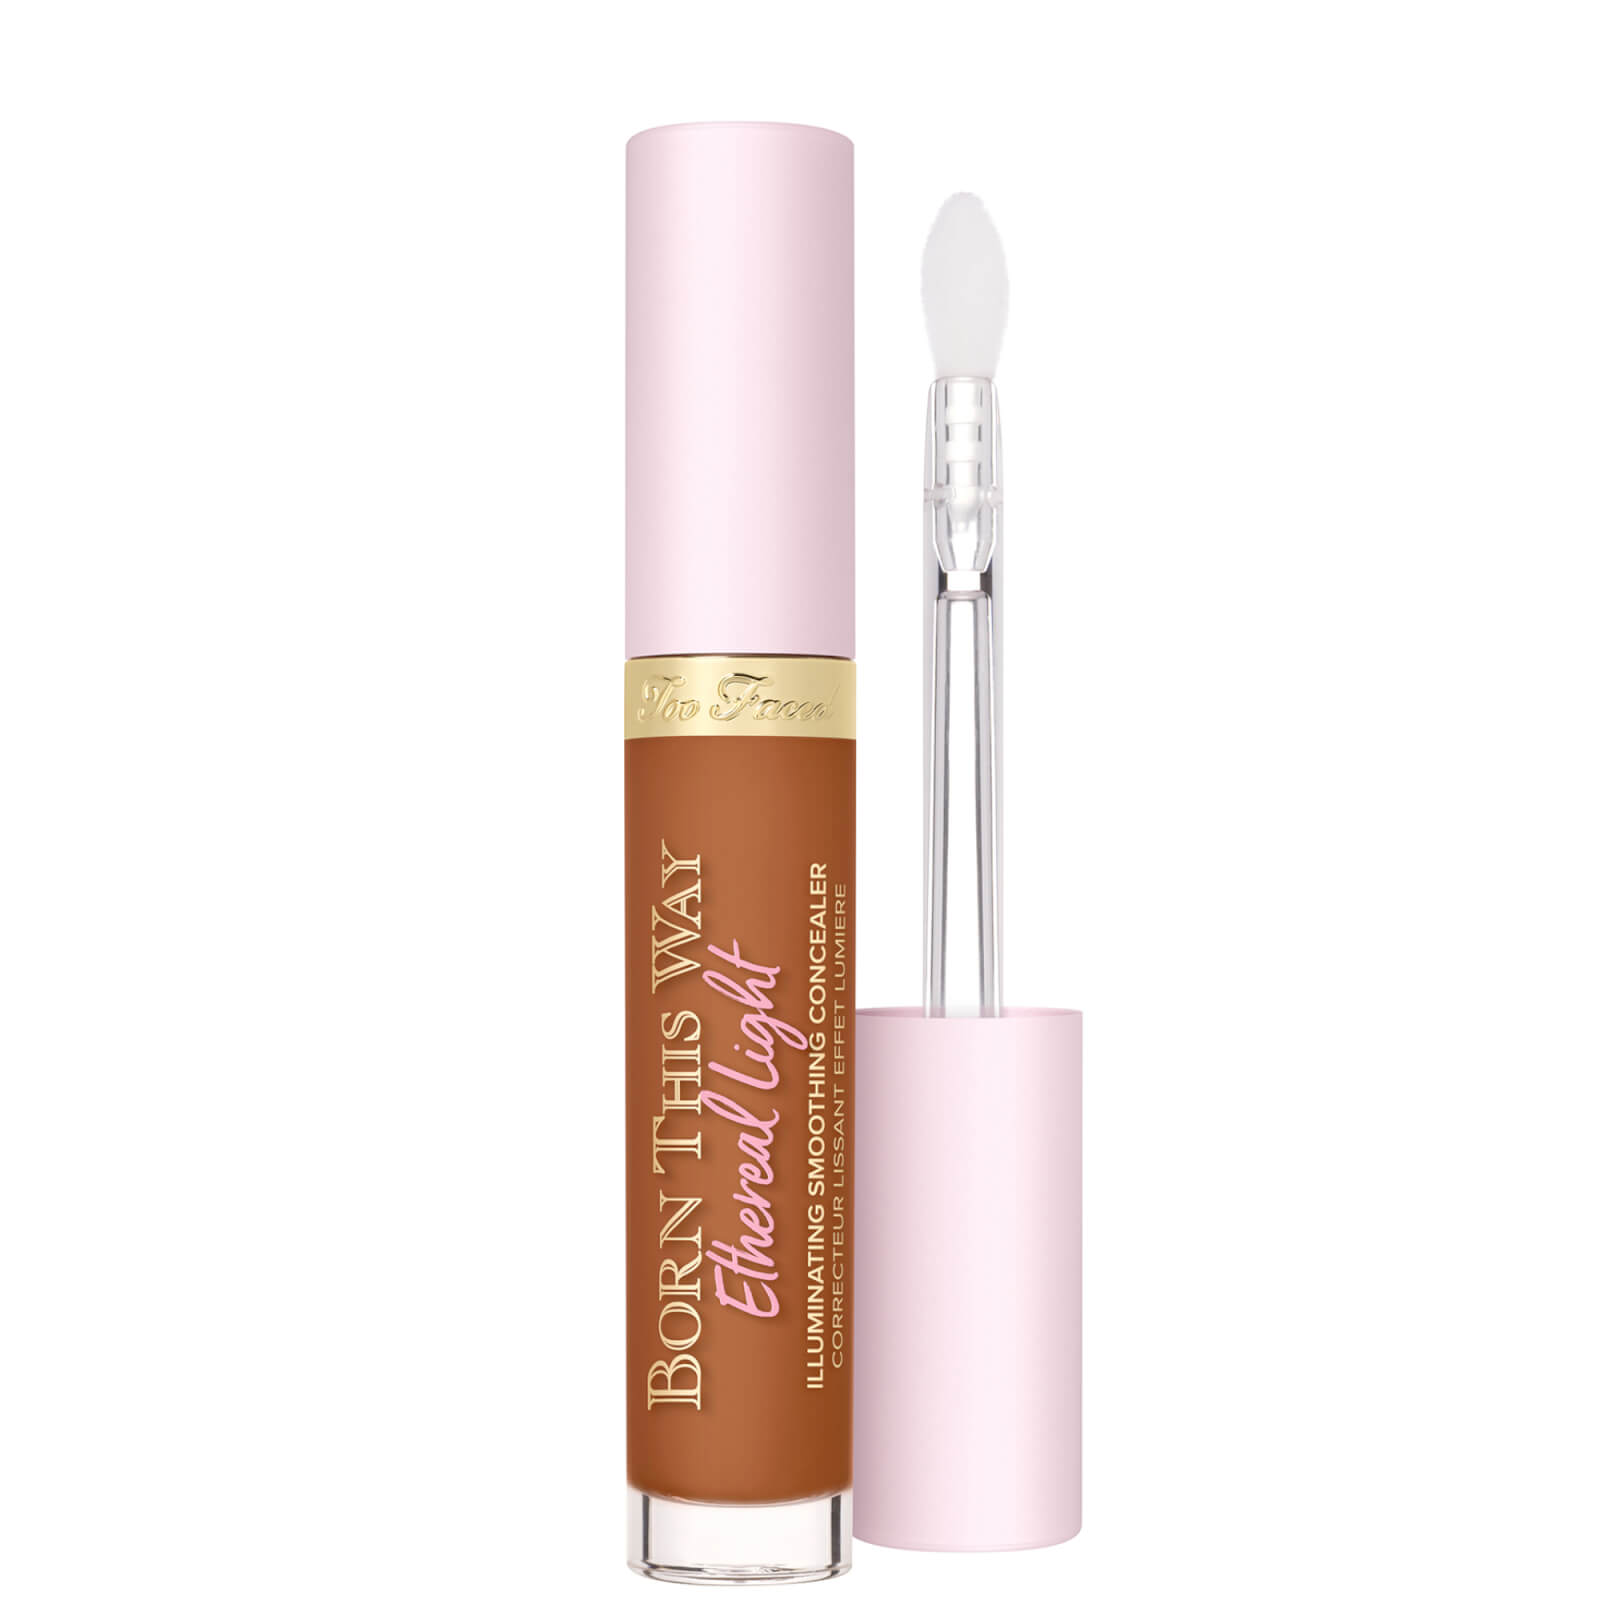 Too Faced Born This Way Ethereal Light Illuminating Smoothing Concealer 15ml (Various Shades) - Caramel Drizzle